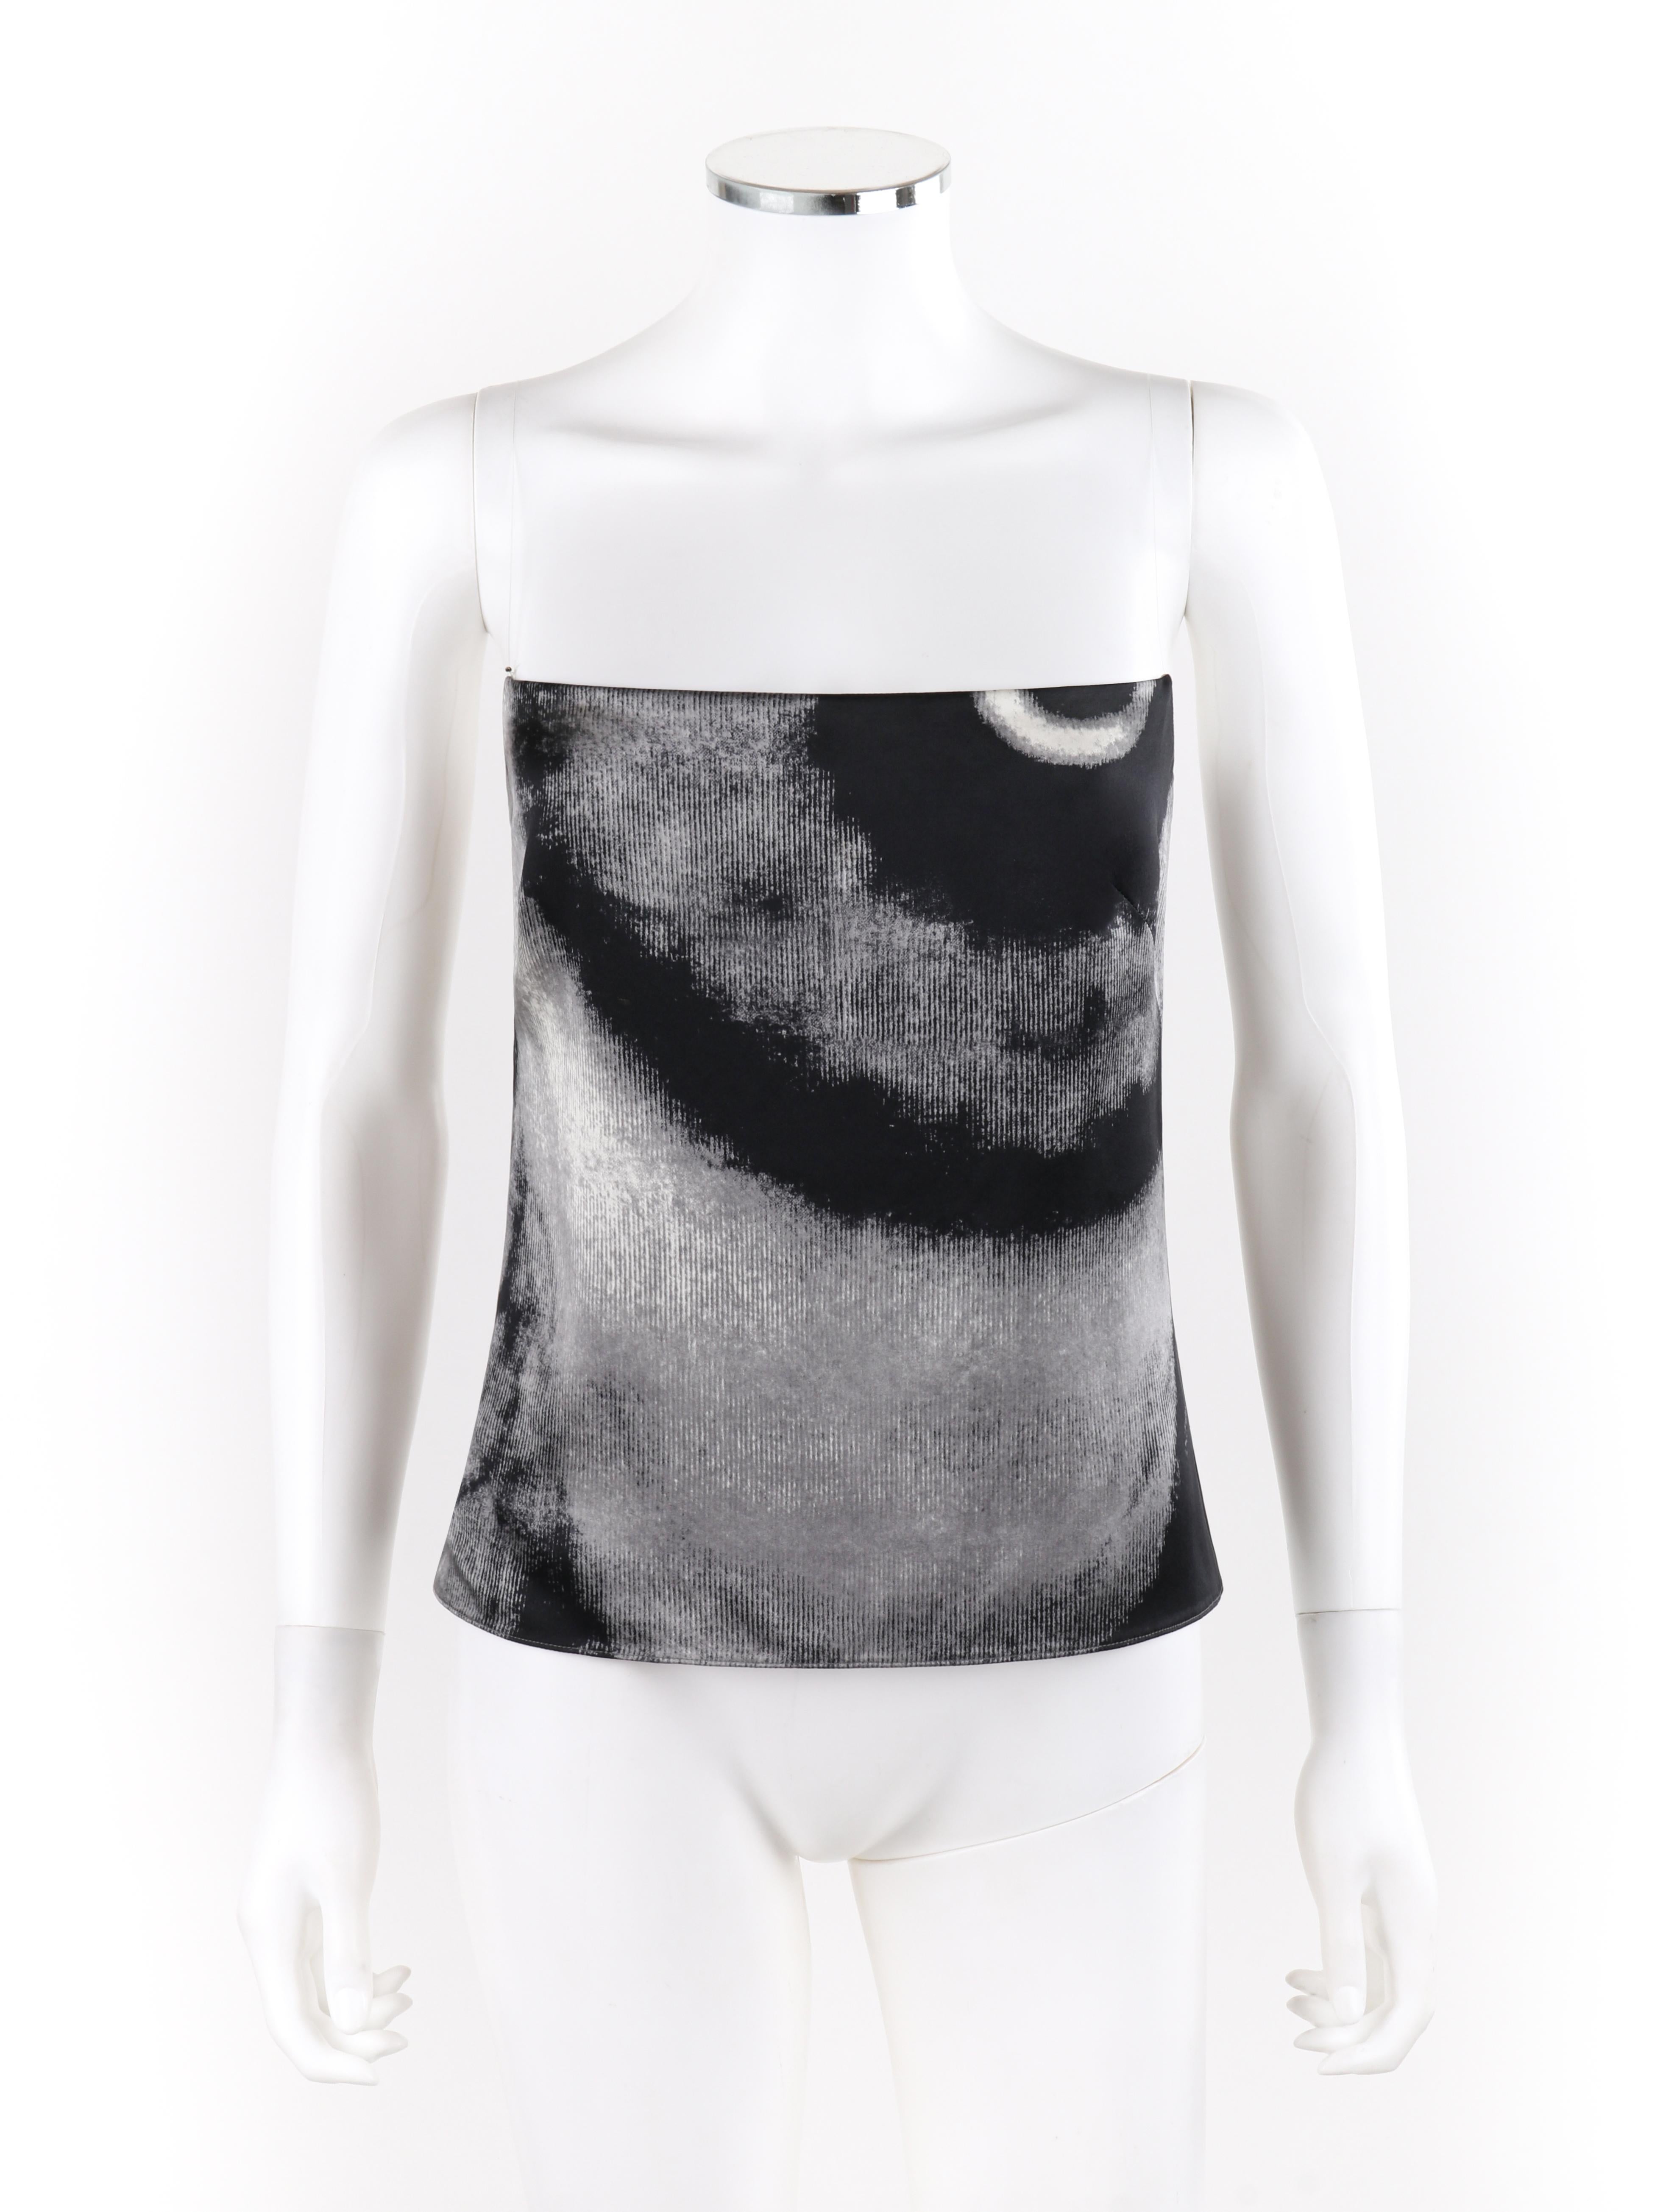 GIVENCHY S/S 1999 ALEXANDER McQUEEN Black White Abstract Eye Illusion Tank Top
 
Brand / Manufacturer: Givenchy
Collection: S/S 1999
Style: Tank top
Color(s): Shades of black, white, and grey
Lined: Yes
Marked Fabric Content: 100% silk  
Additional